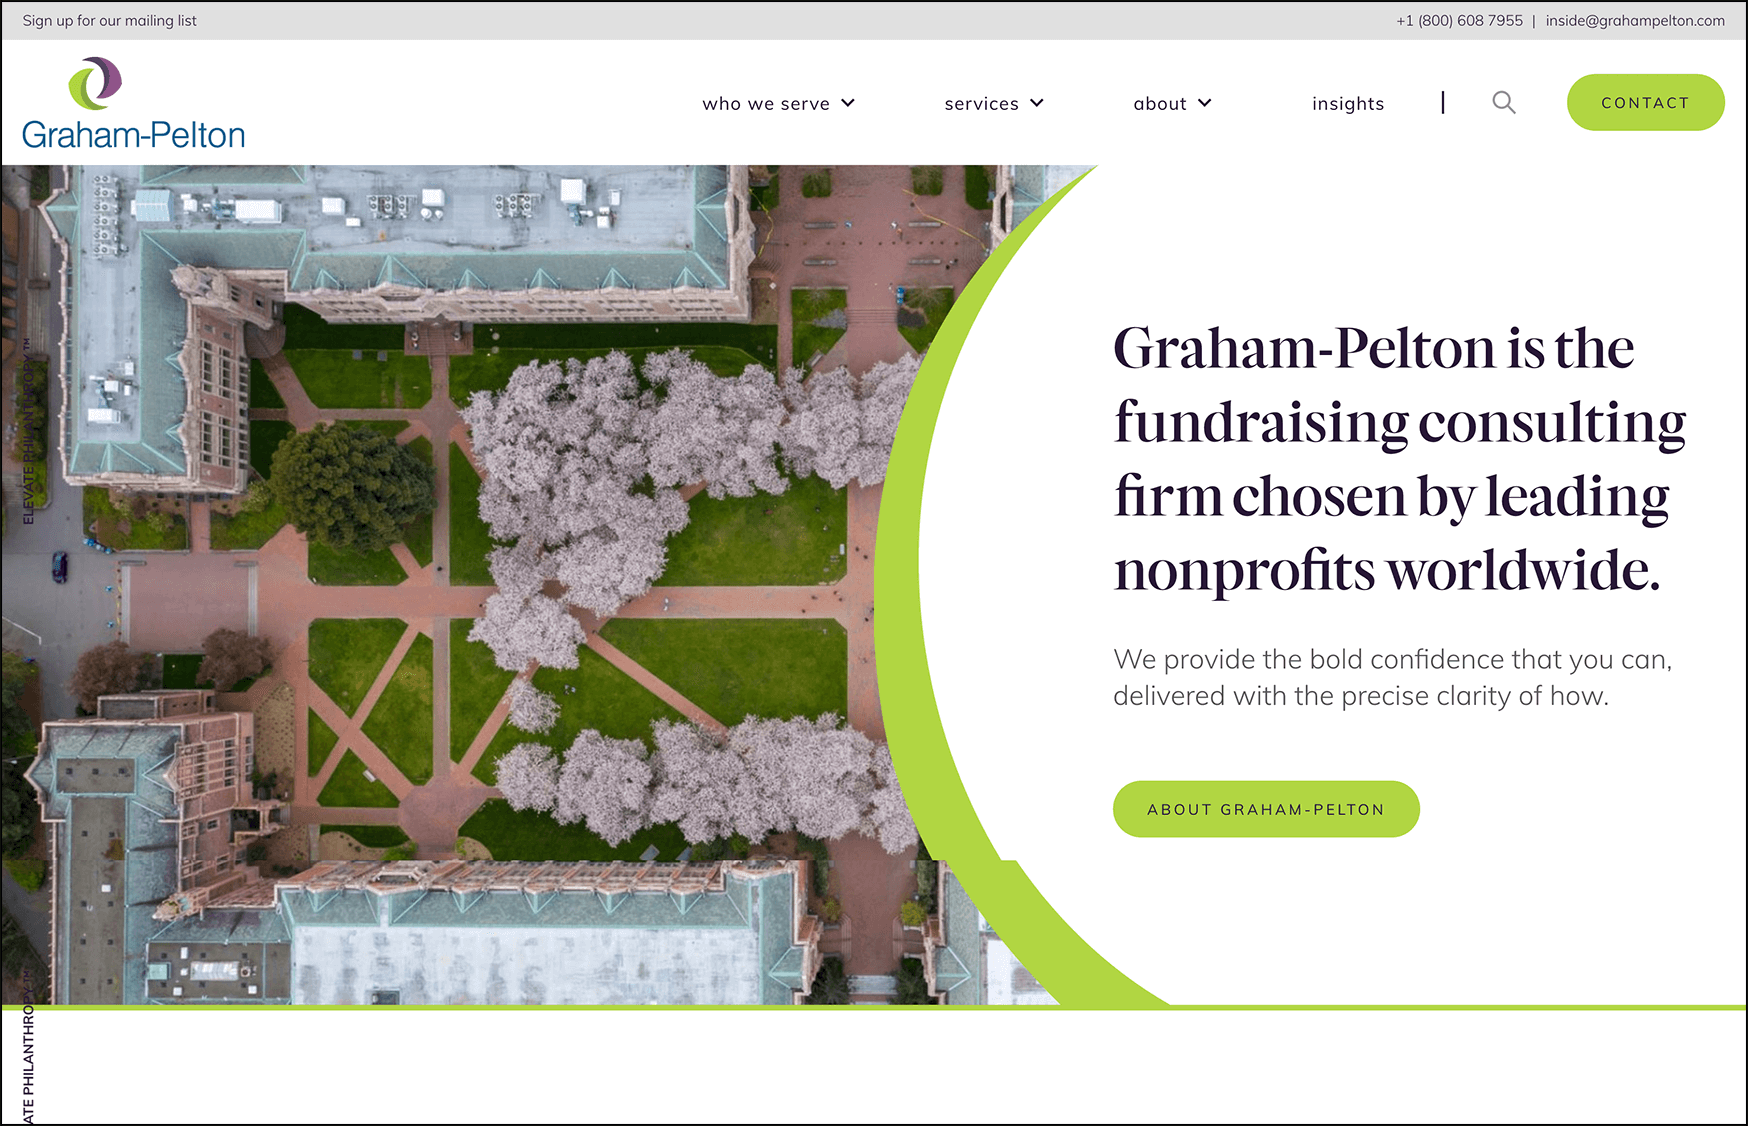 Graham-Pelton is a top fundraising consulting firm. 